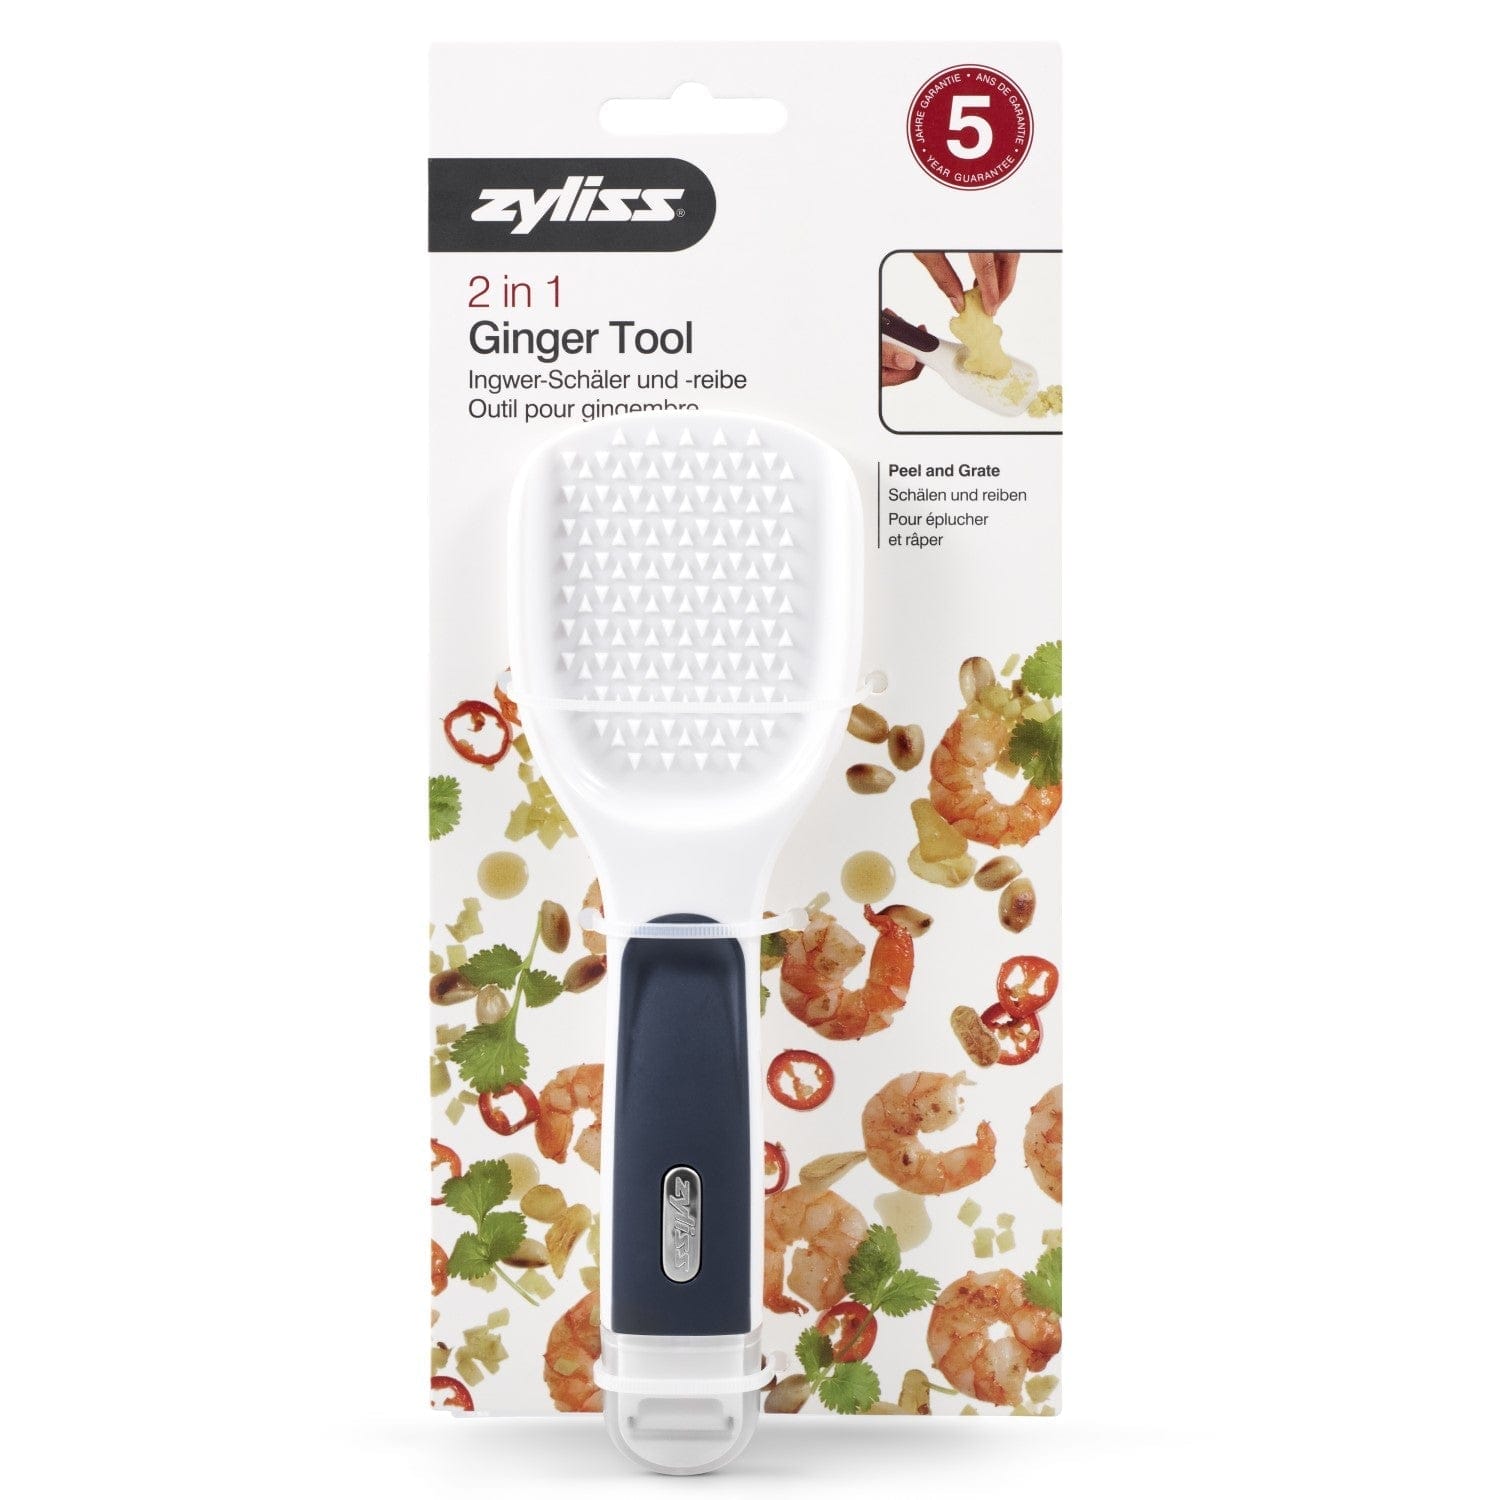 Zyliss Peel & Grate Ginger Tool - Discontinued